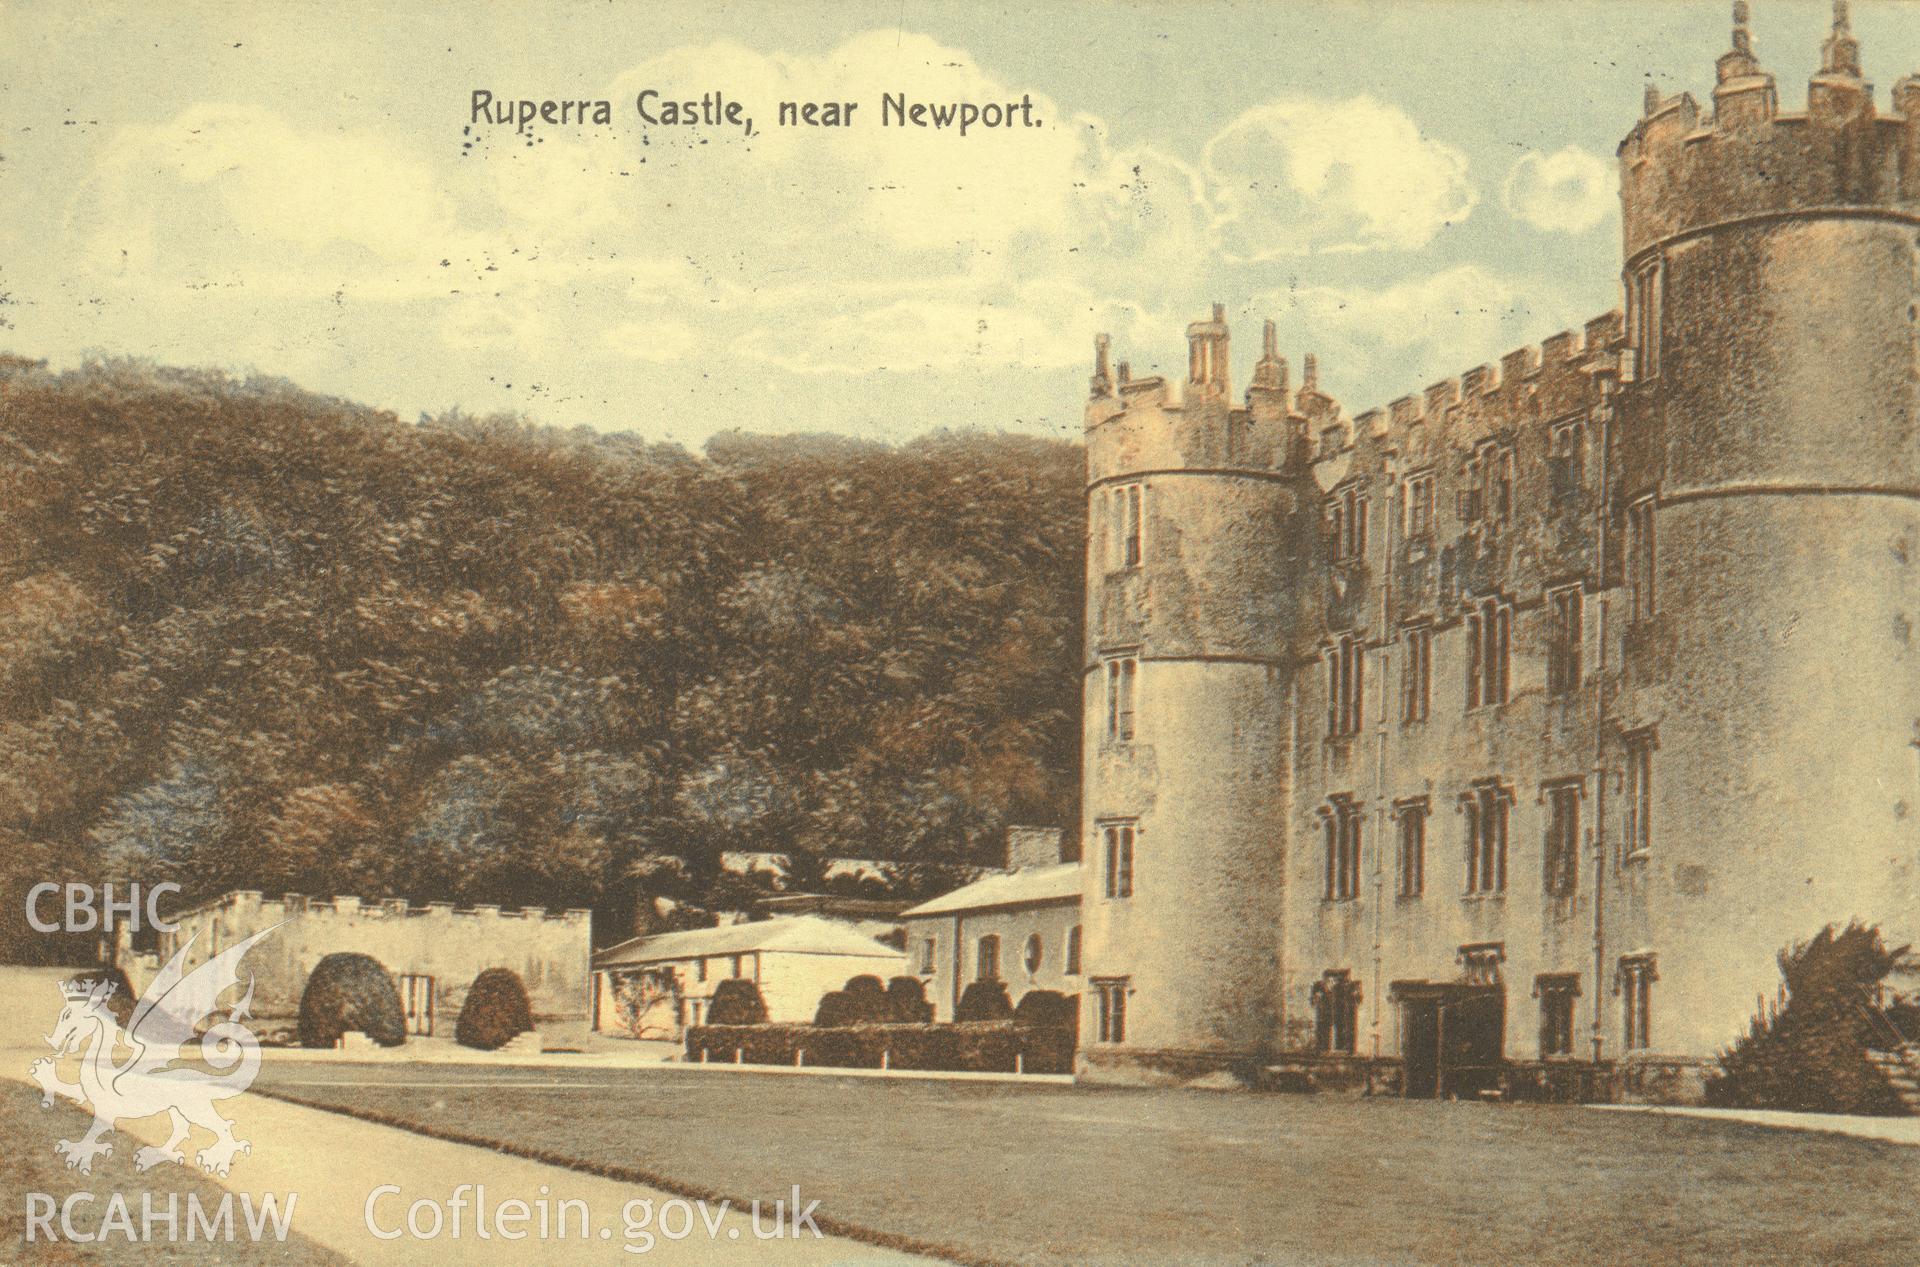 Digitised postcard image of Ruperra Castle, Draethen, W. Jones, 159 Commercial St., Newport. Produced by Parks and Gardens Data Services, from an original item in the Peter Davis Collection at Parks and Gardens UK. We hold only web-resolution images of this collection, suitable for viewing on screen and for research purposes only. We do not hold the original images, or publication quality scans.